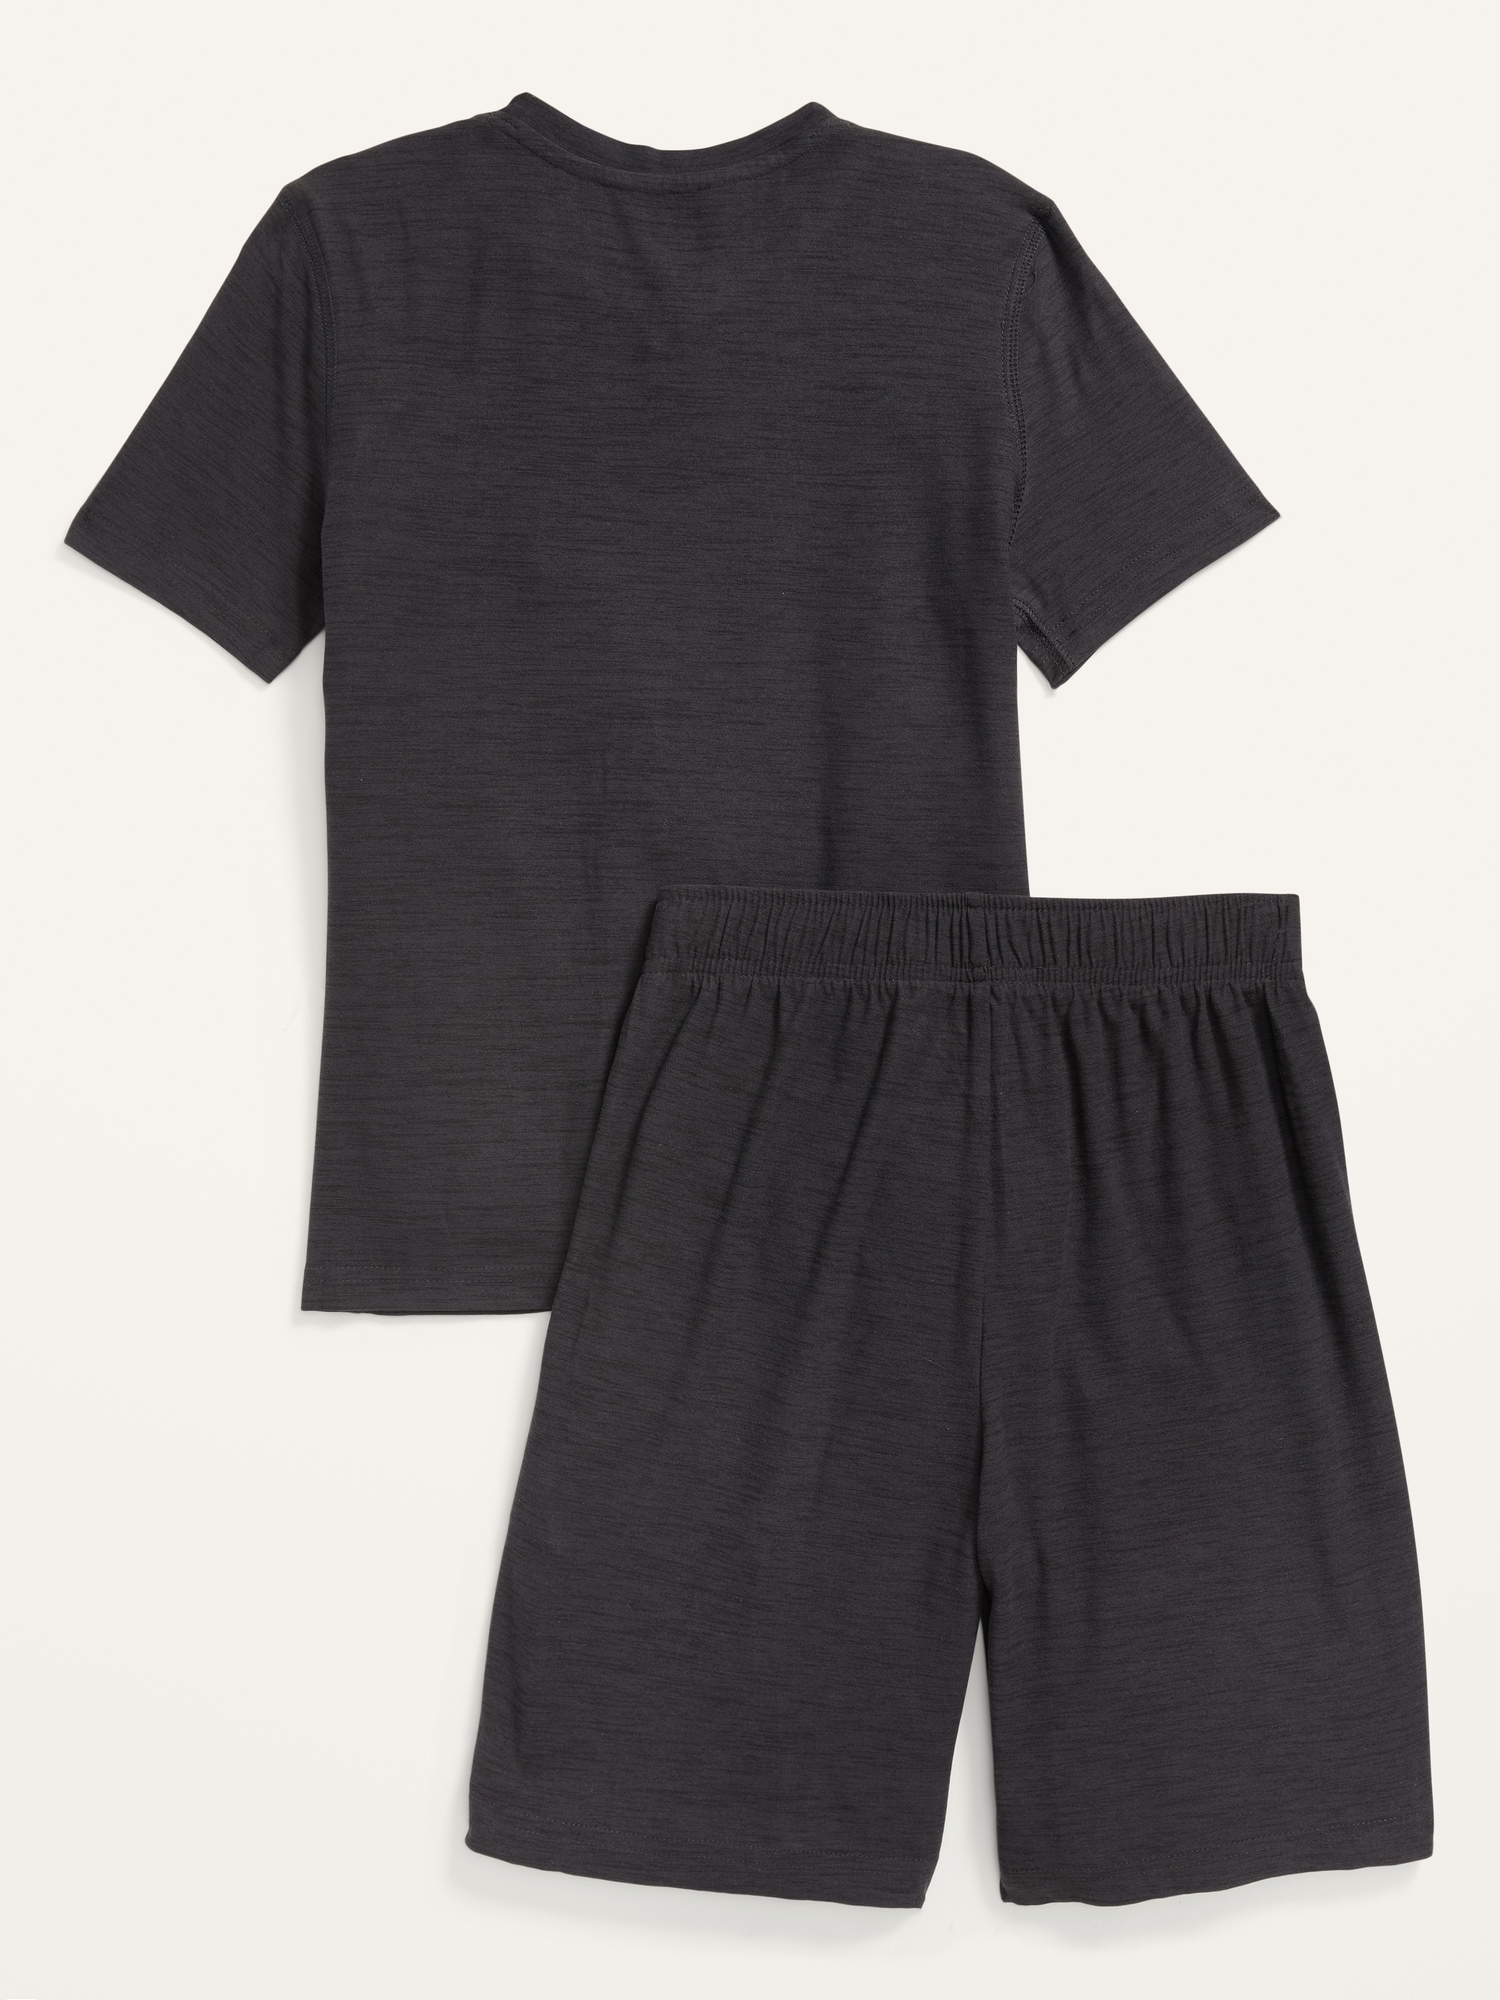 Breathe On Tee And Shorts Set For Boys | Old Navy